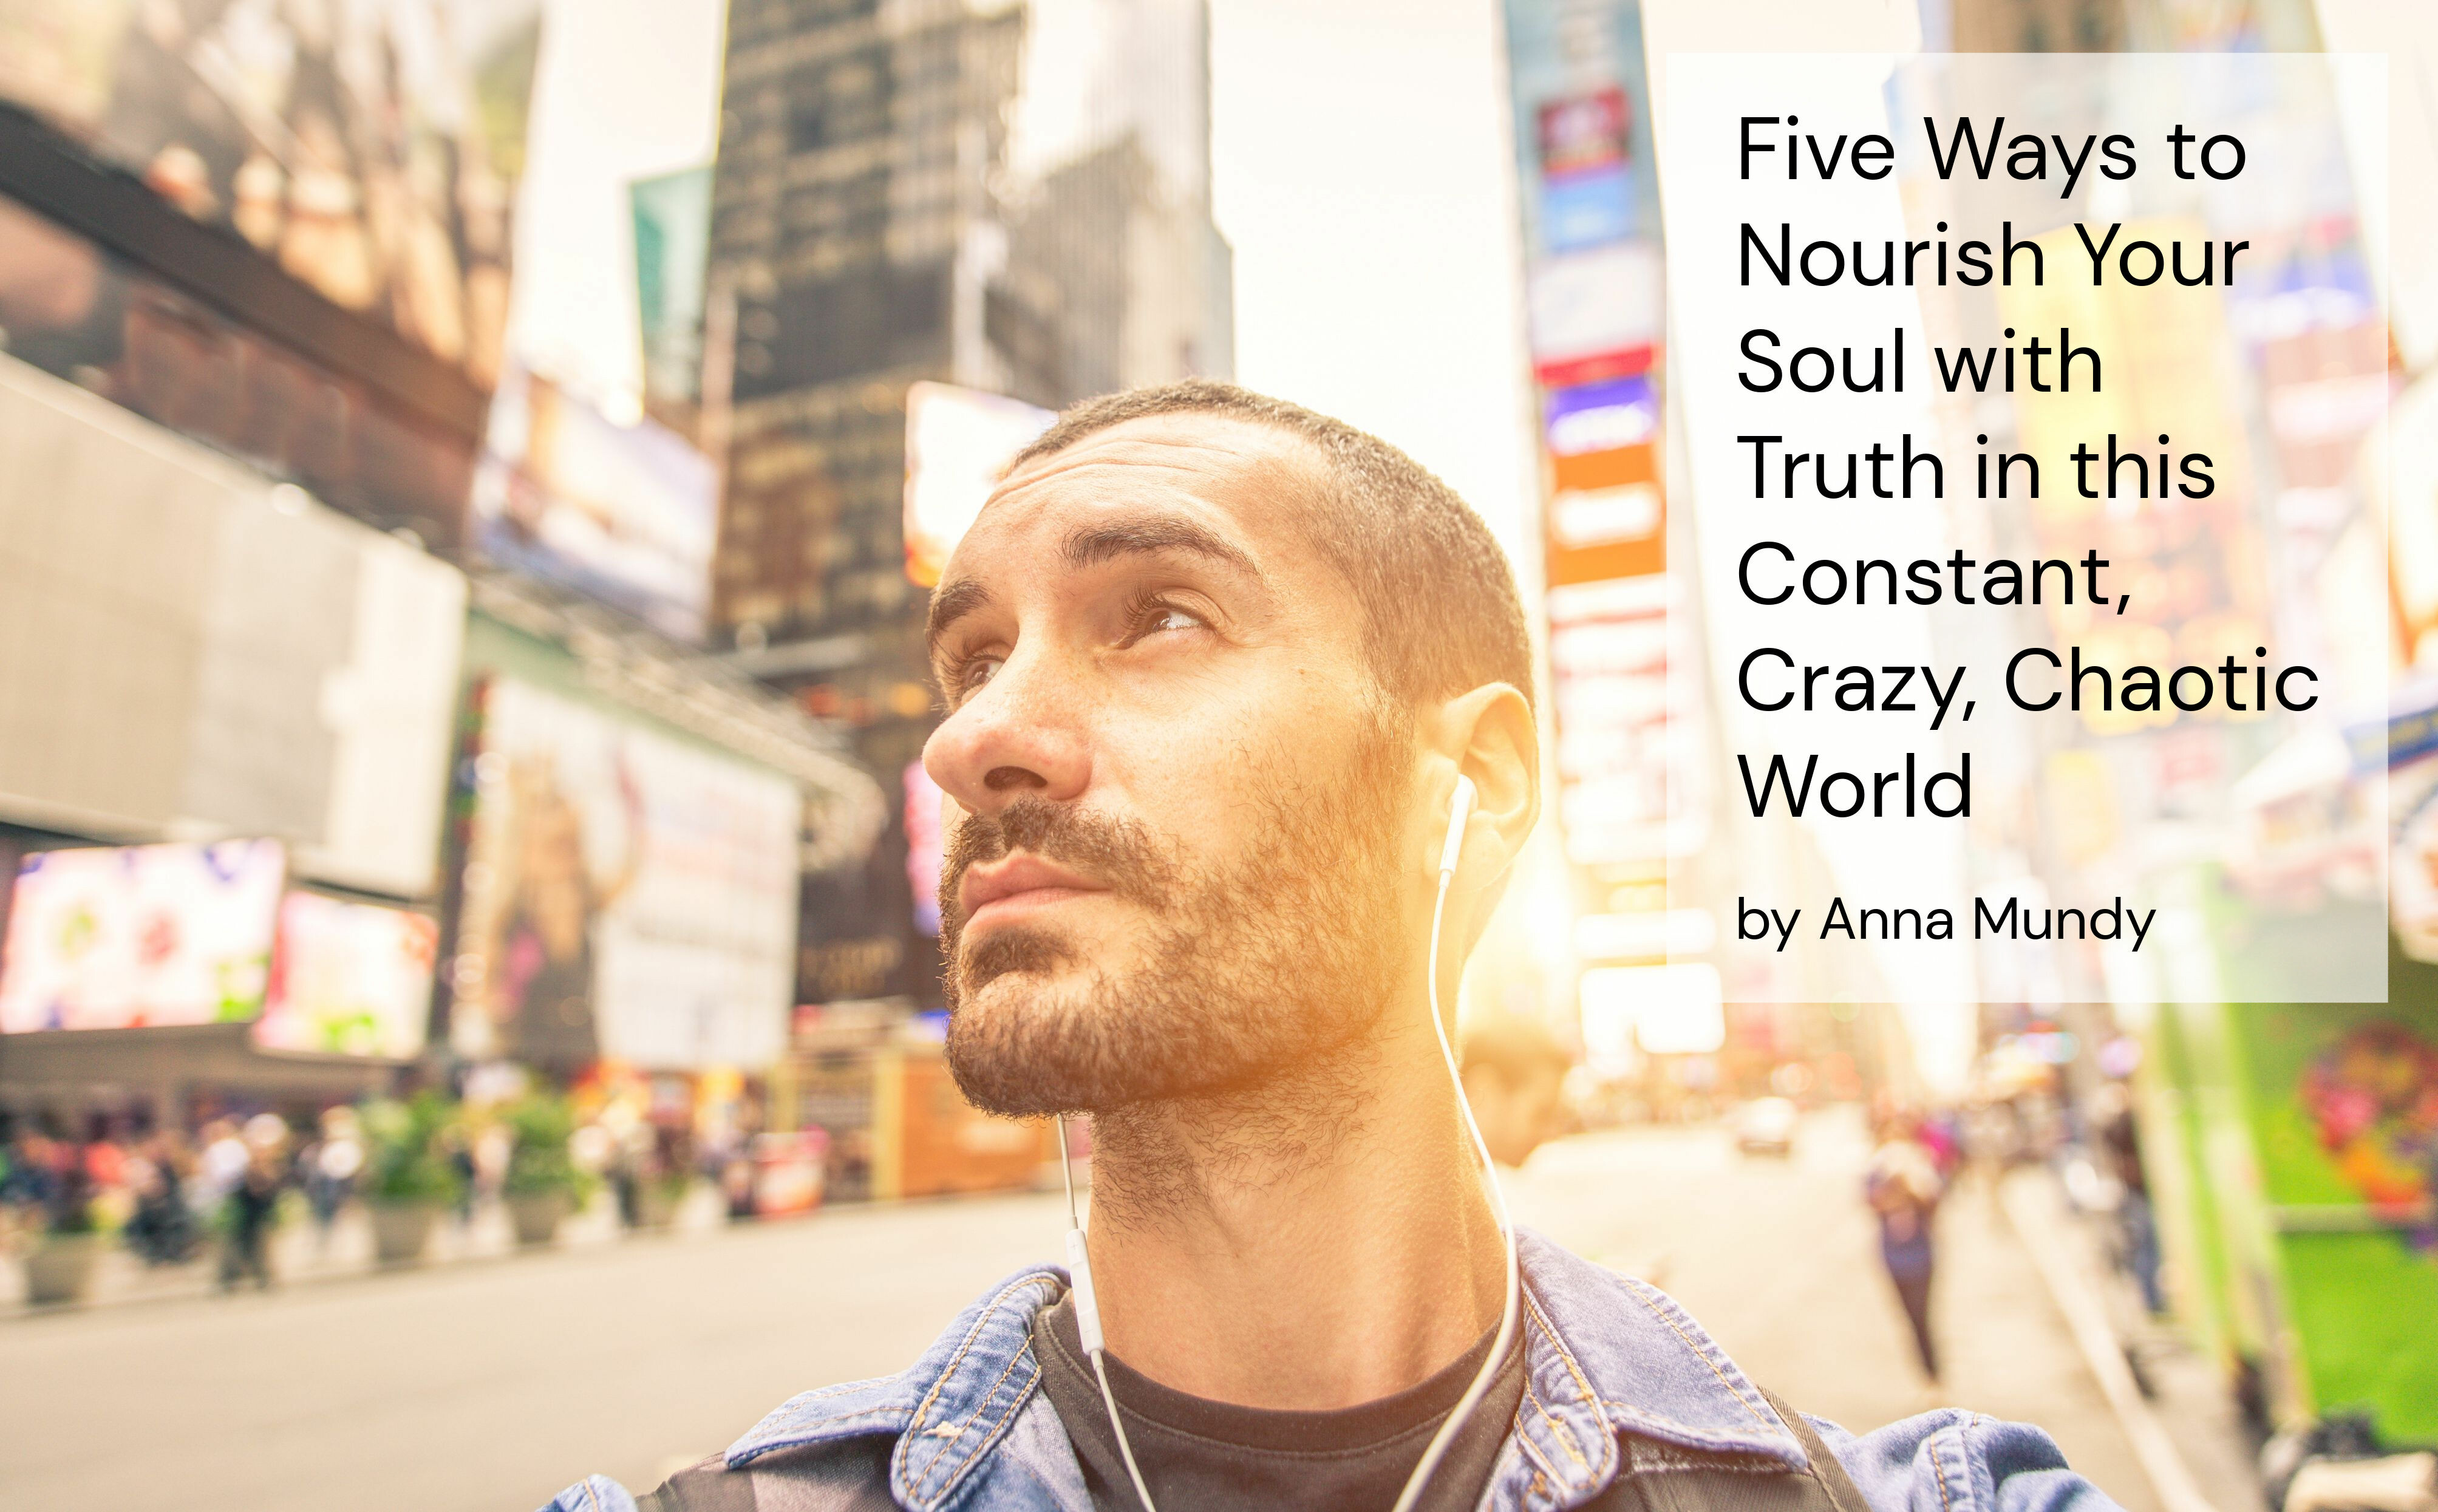 five-ways-to-nourish-your-soul-with-truth-in-this-constant-crazy-chaotic-world